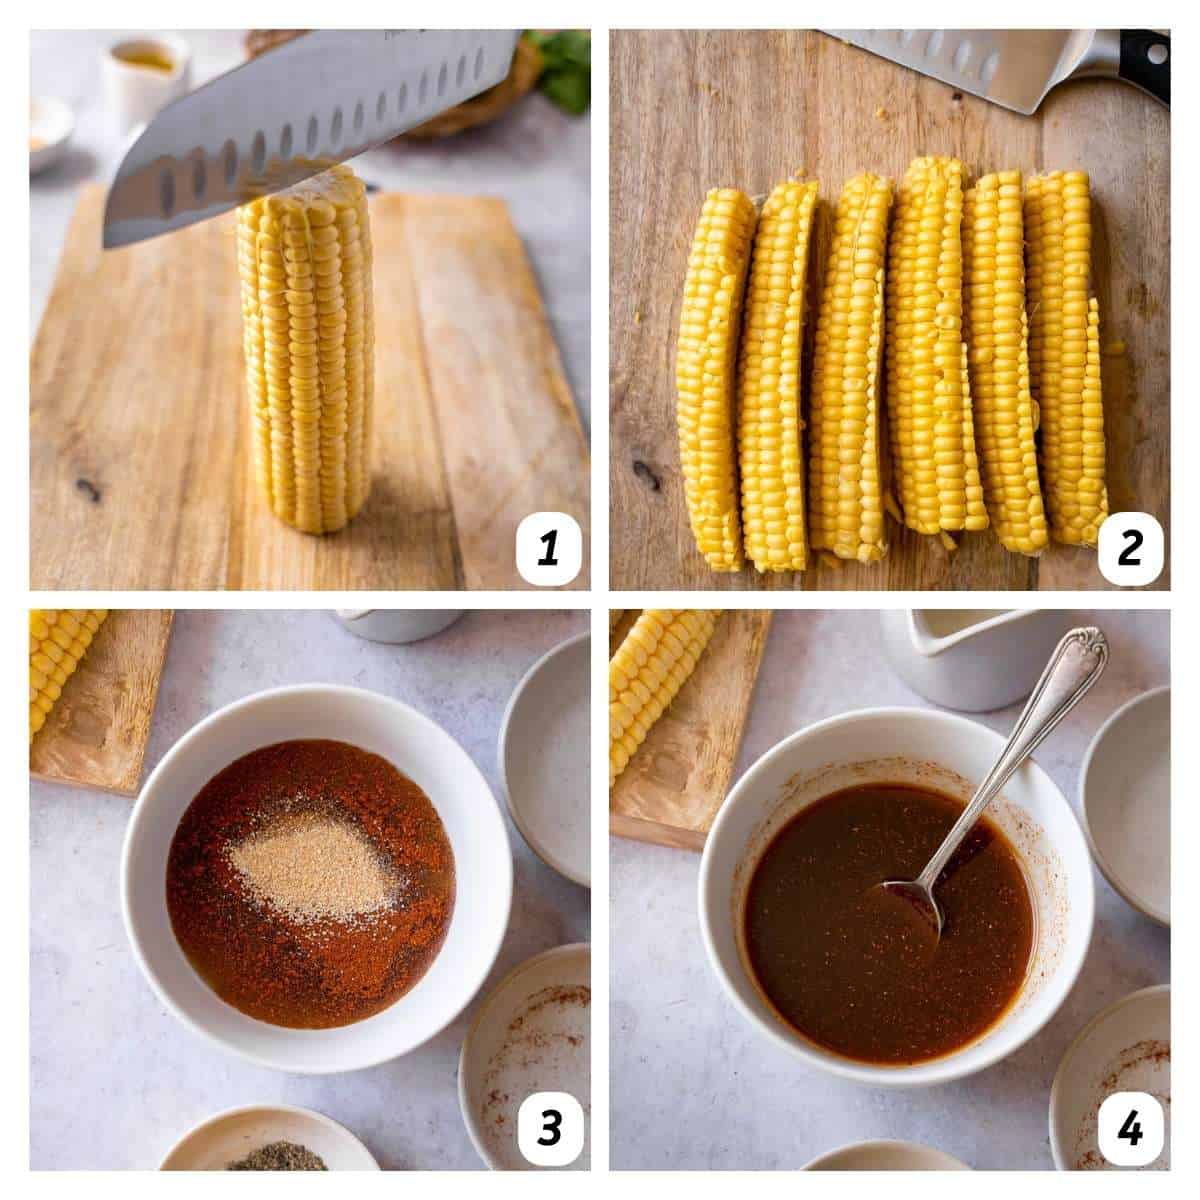 Four panel grid of process shots 1-4 - cutting off ribs from corn on the cob and mixing together ingredients for the rub.